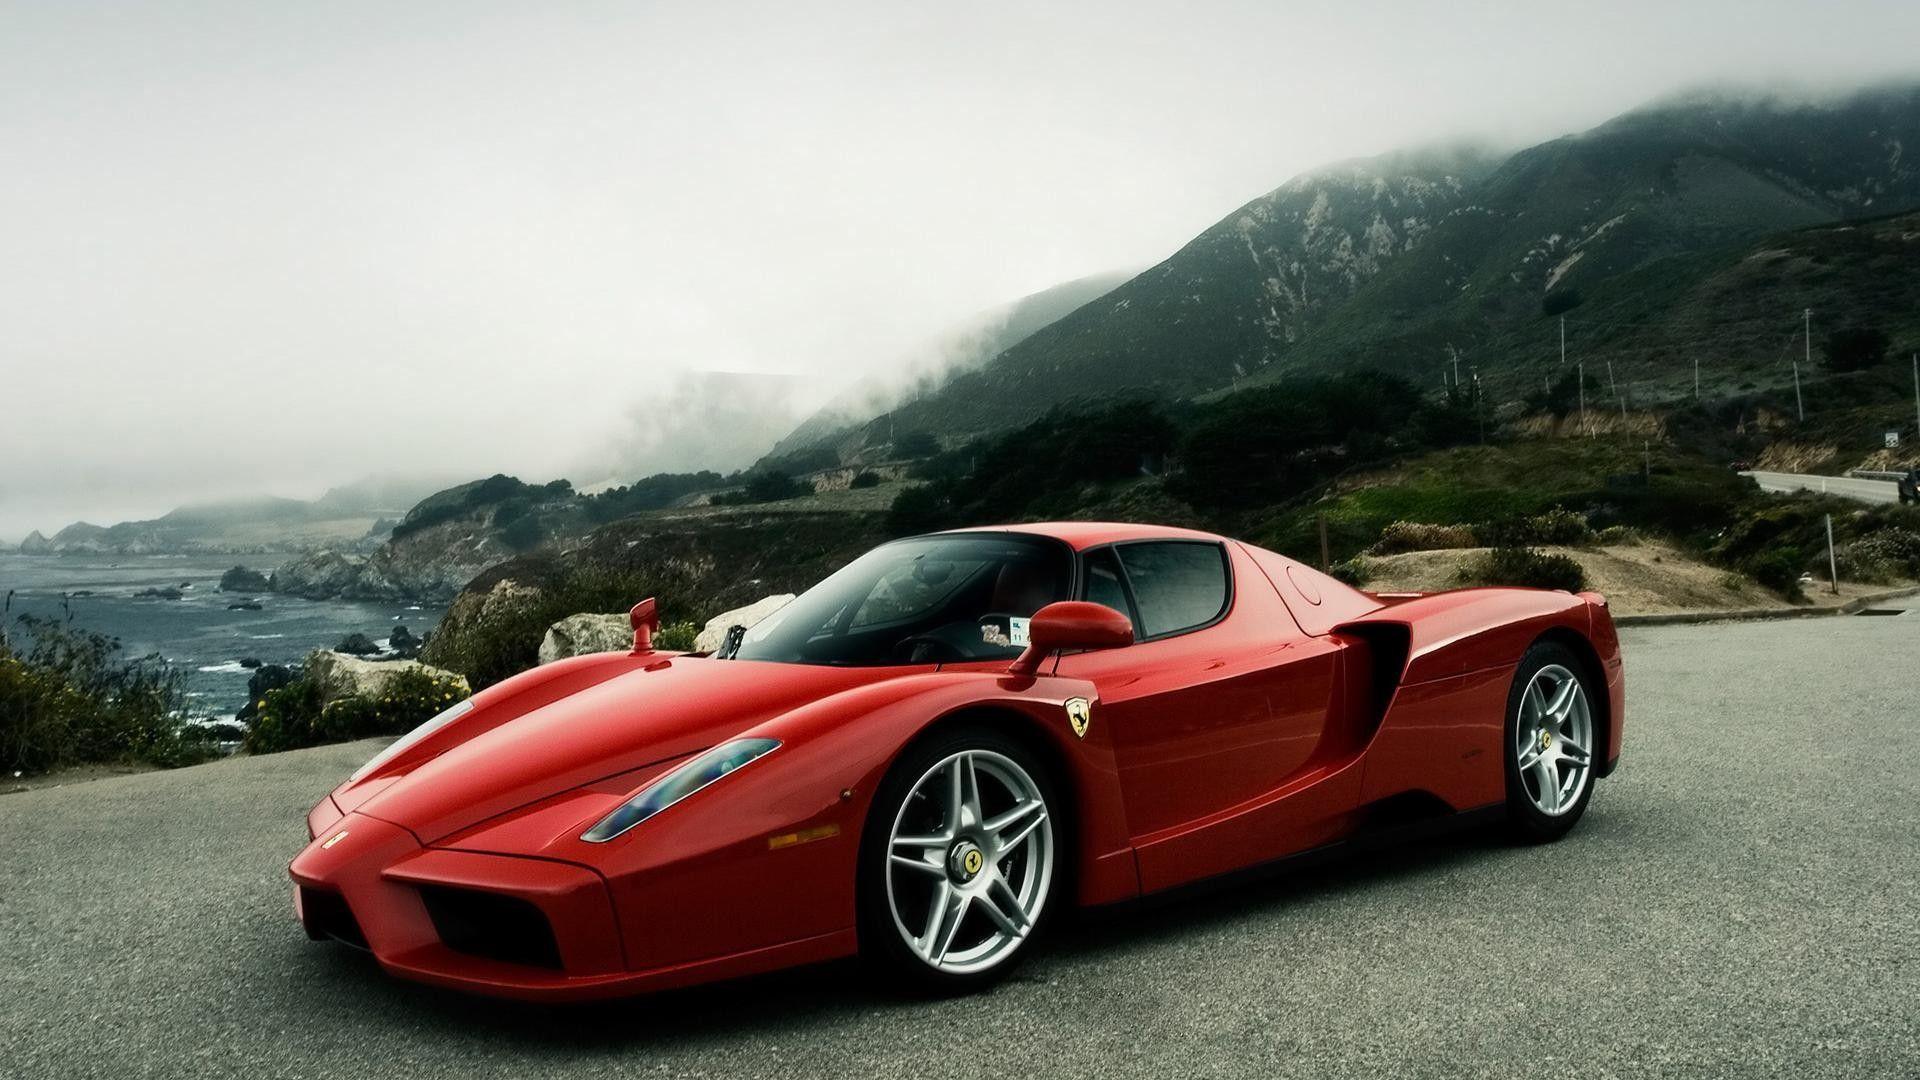 Car wallpaper HDDownload free stunning full HD background